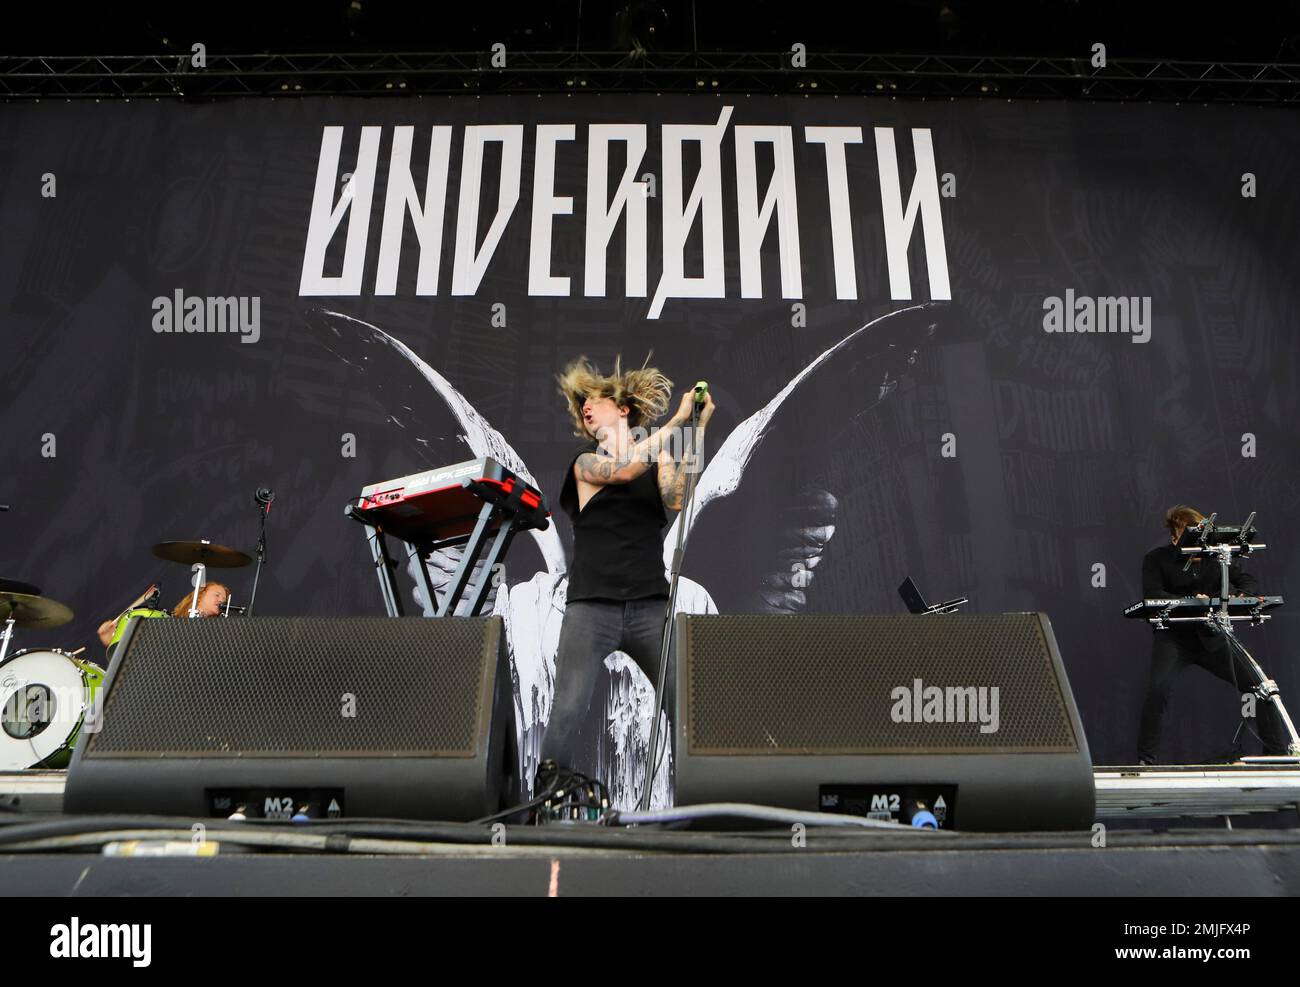 Underoath - Christopher Dudley, Christopher Dudley of Under…